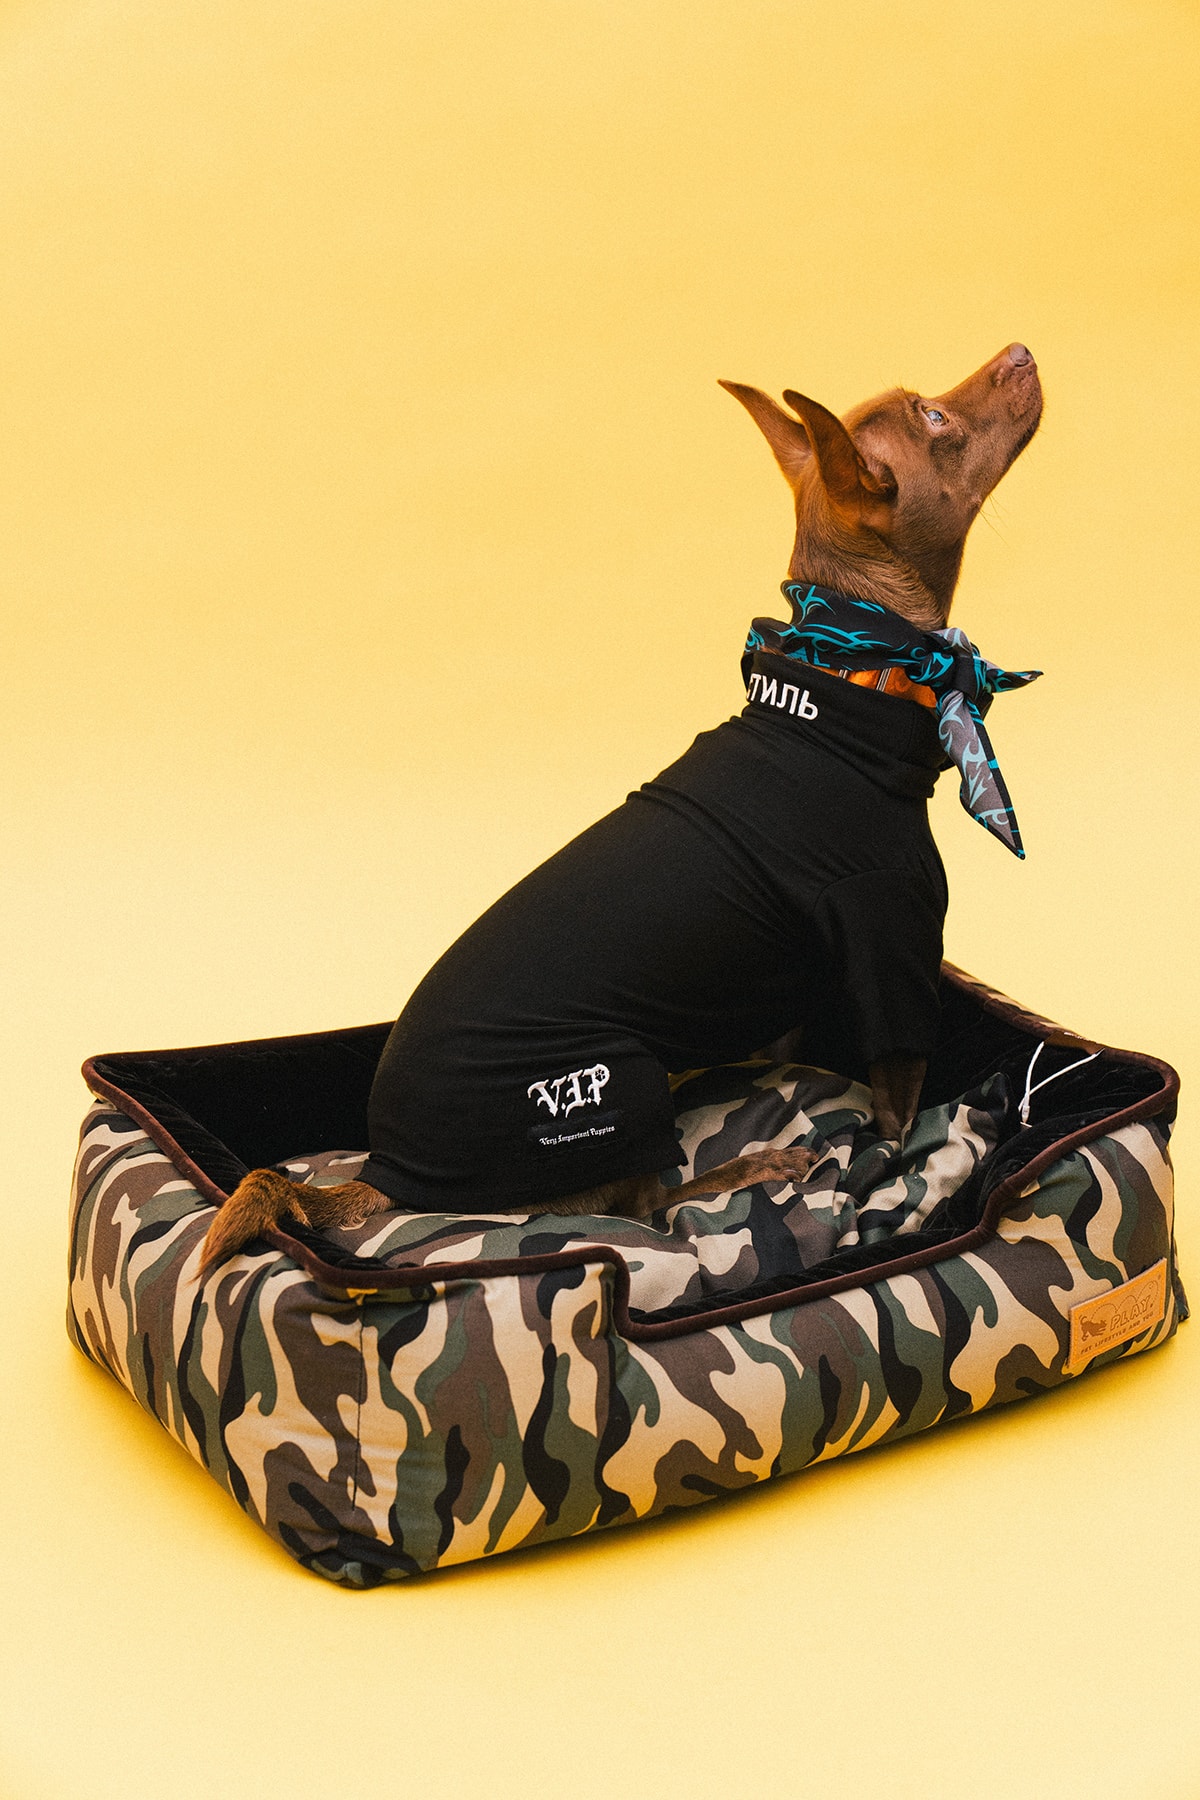 The 10 Best Dog Clothing and Accessory Brands